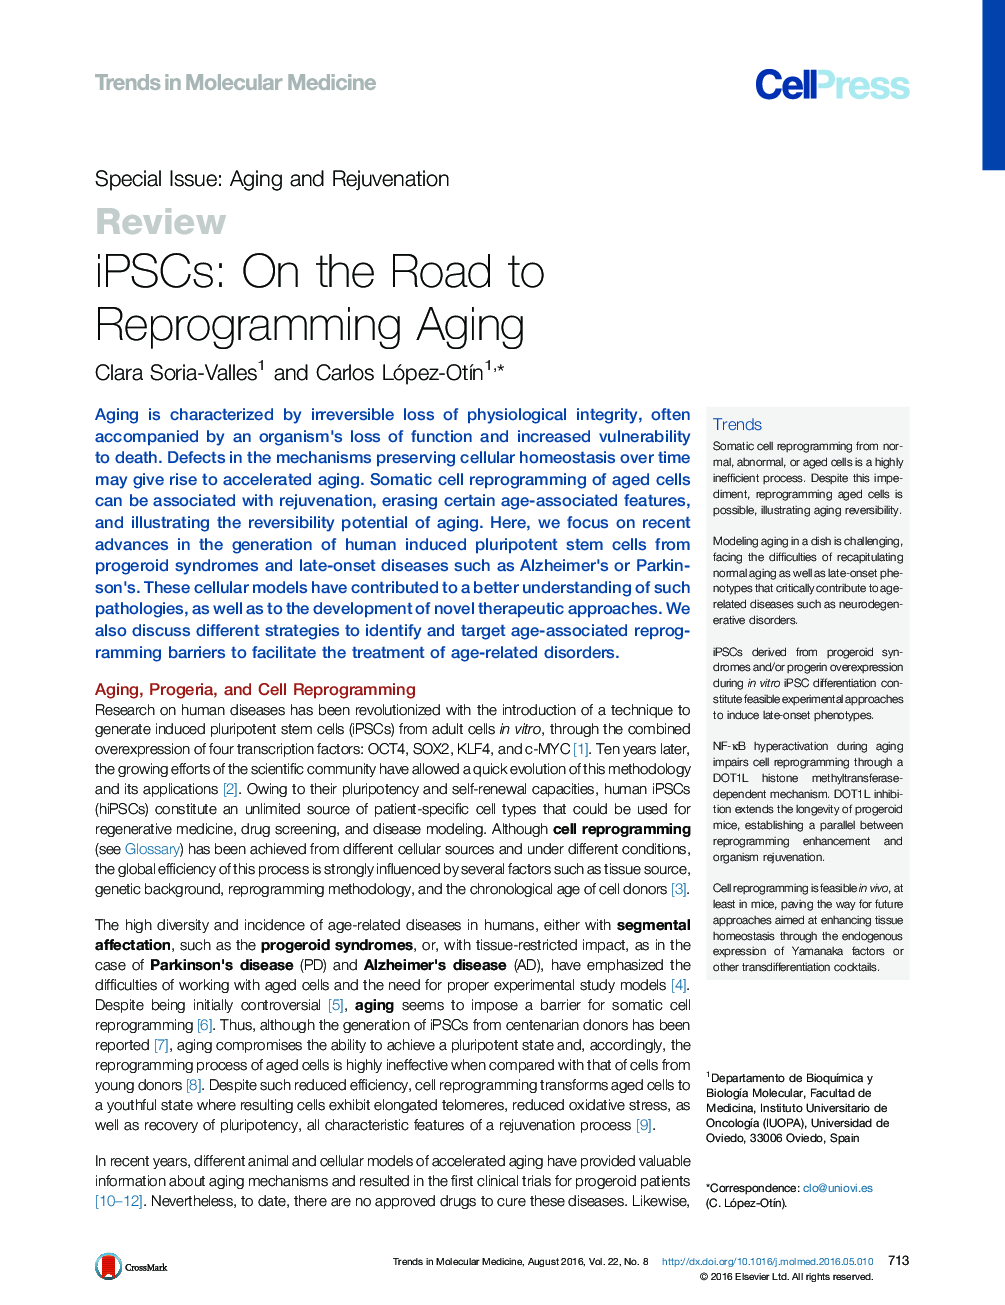 iPSCs: On the Road to Reprogramming Aging